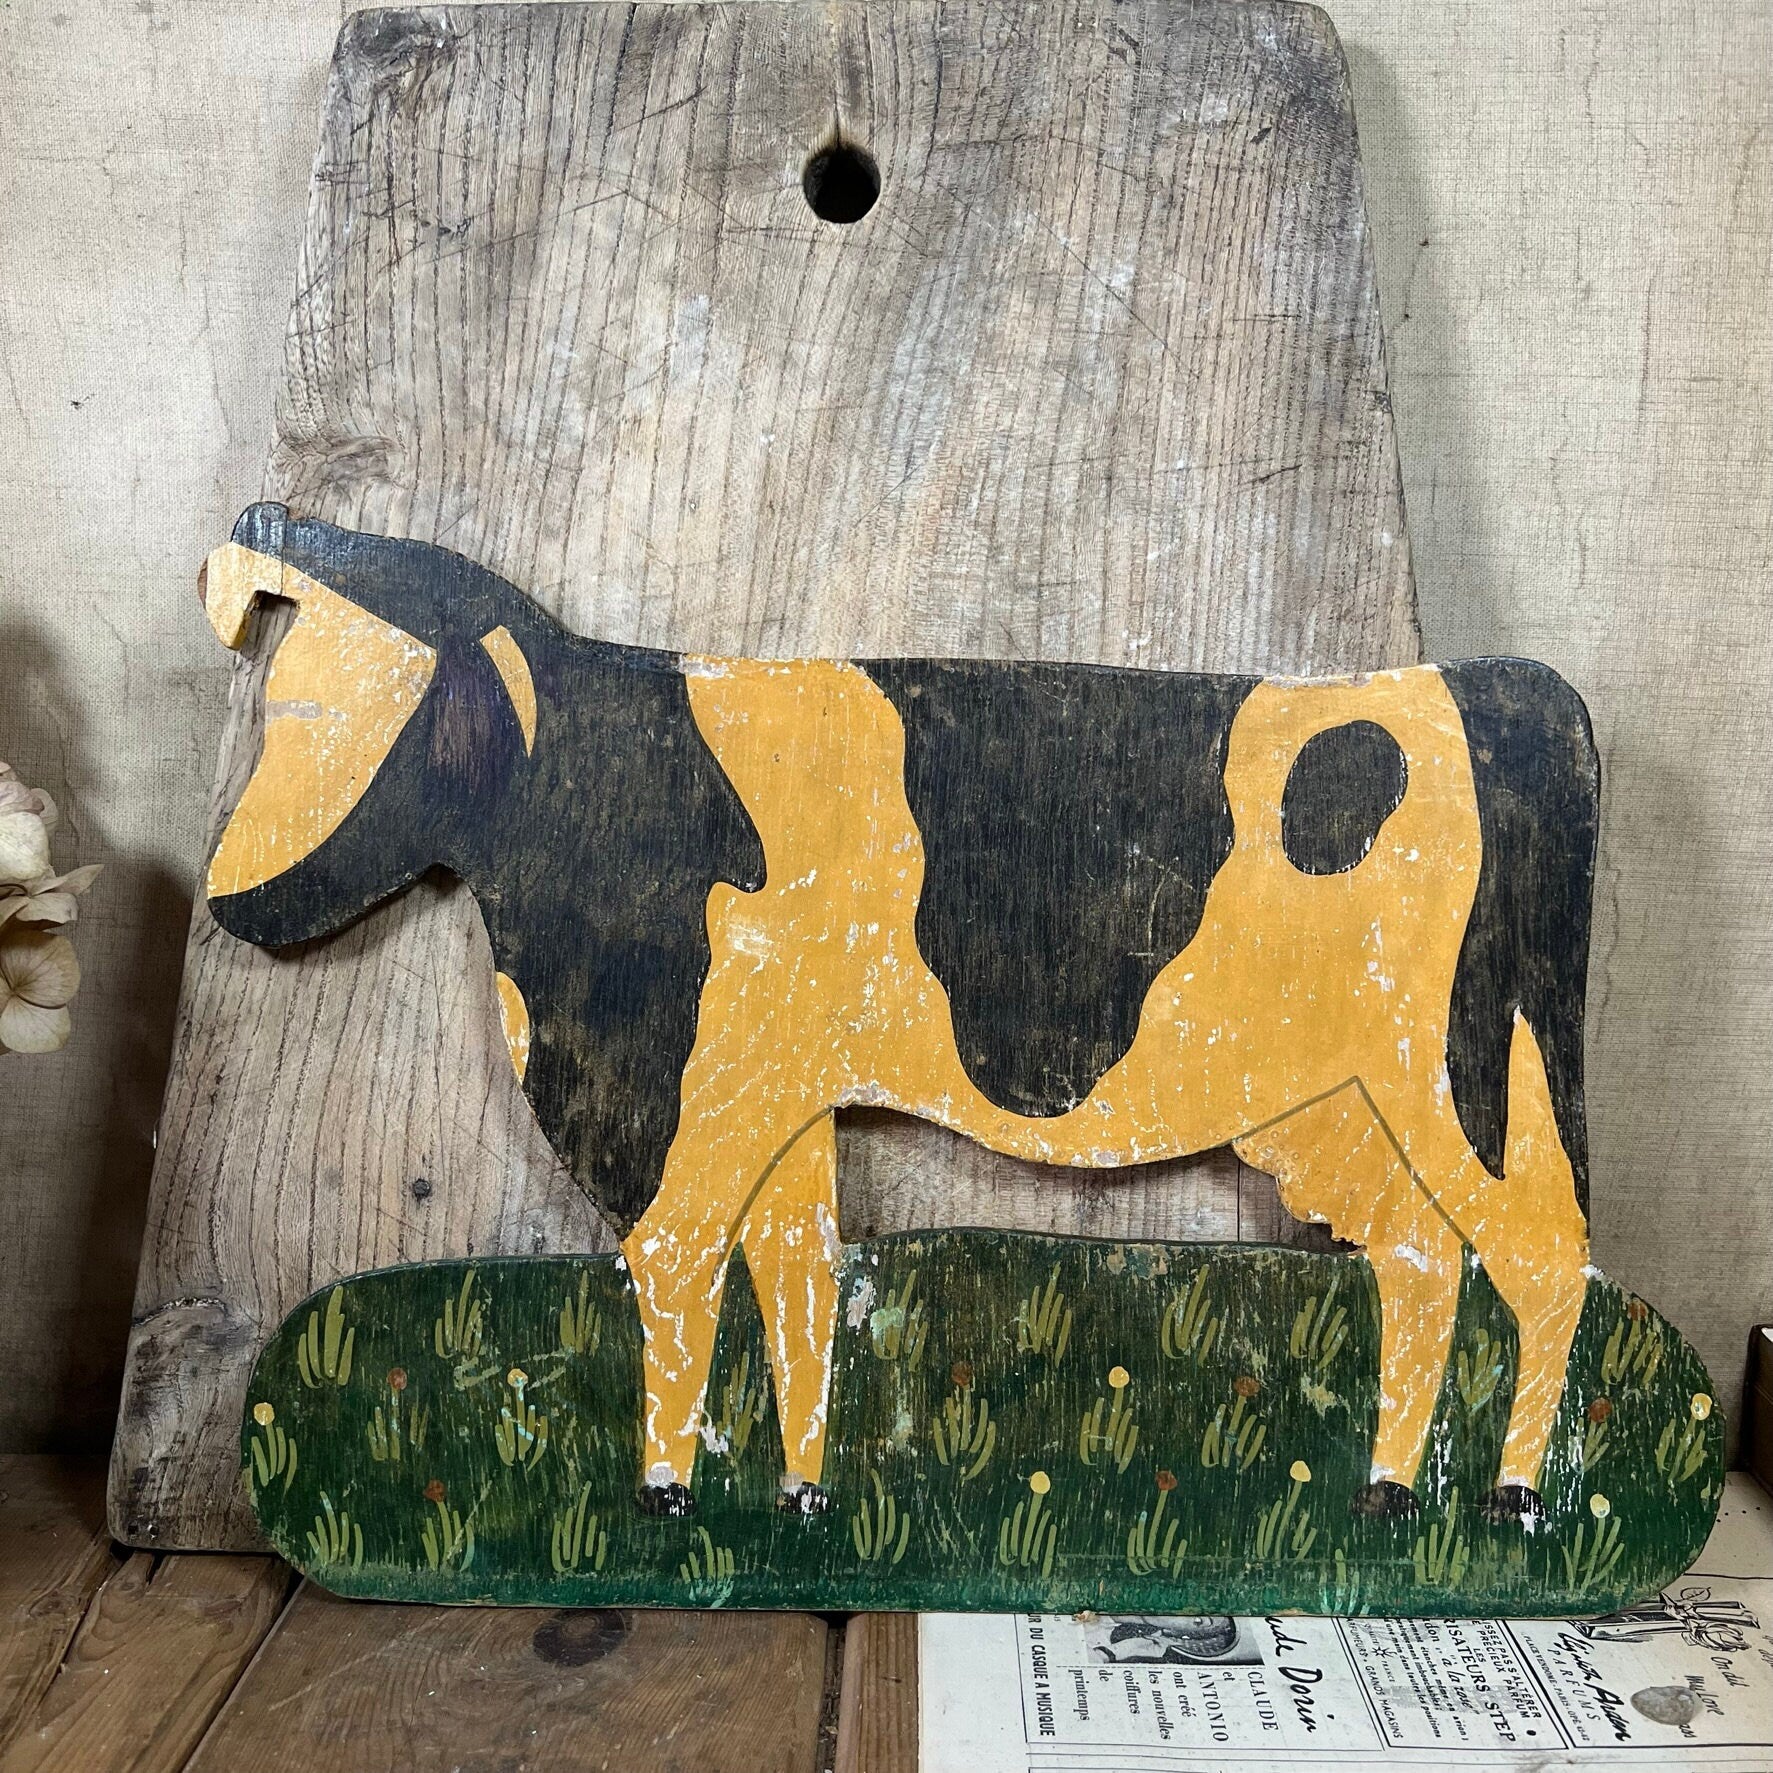 Wooden Painted Cow Flat Board - Wall Hanging